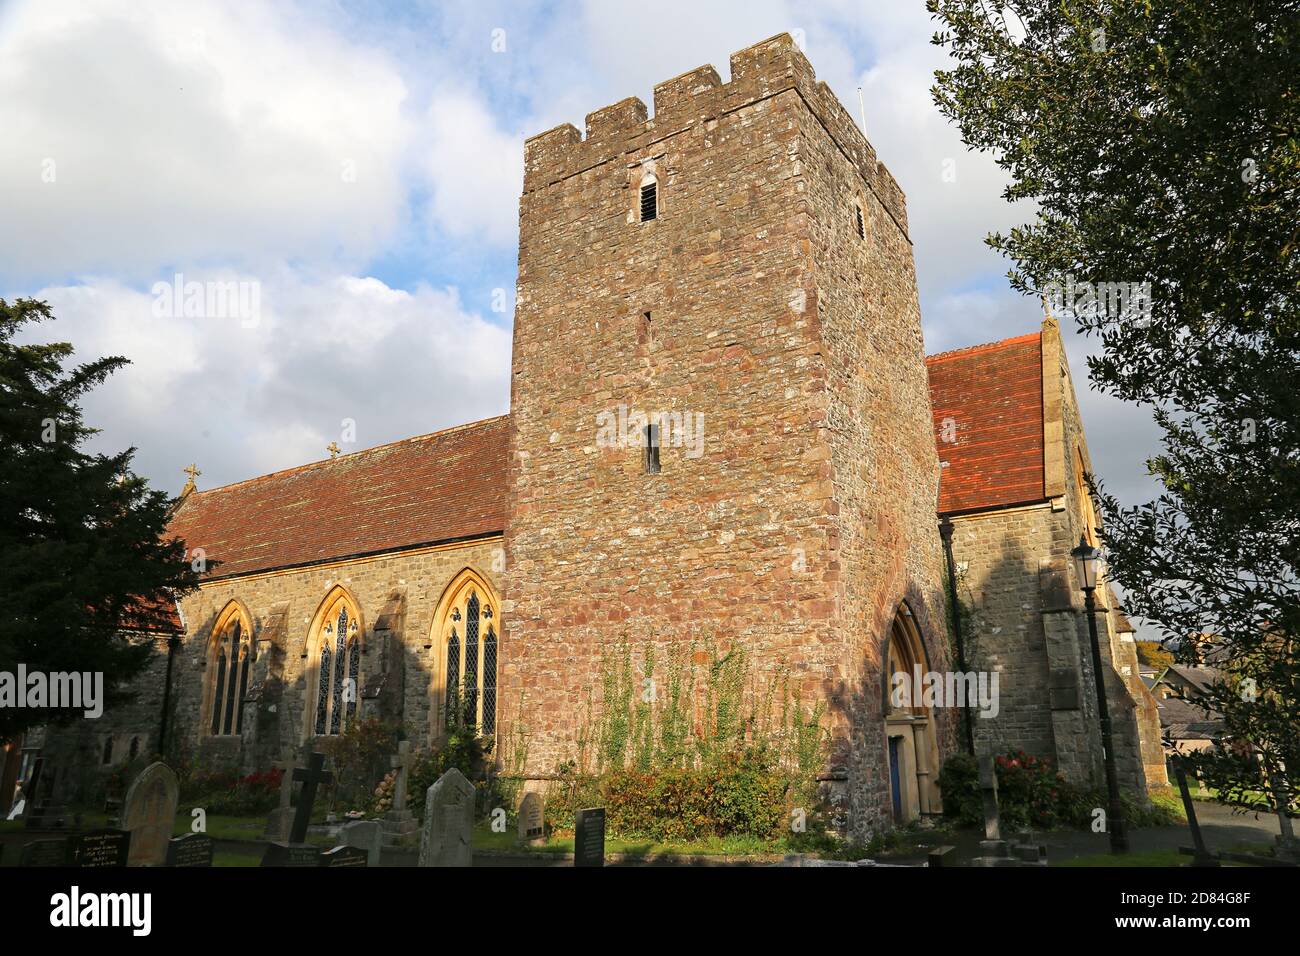 Church of St Mary, Church Street, Builth Wells, Brecknockshire, Powys, Wales, Great Britain, United Kingdom, UK, Europe Stock Photo